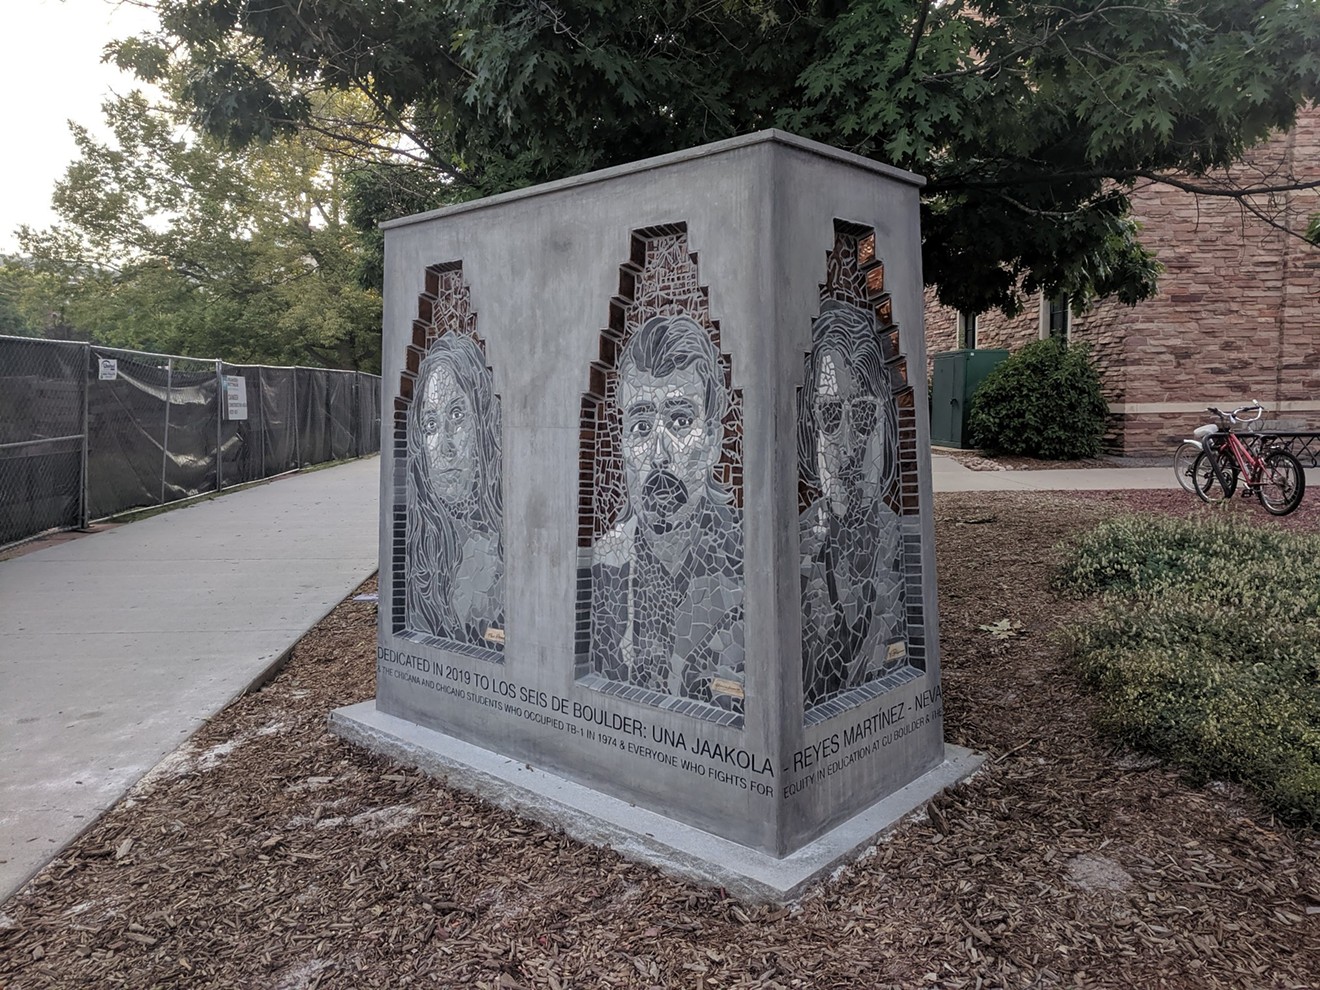 A collaboration among University of Colorado students produced a sculpture on campus honoring six Chicano activists who died in car bombings in Boulder in 1974.